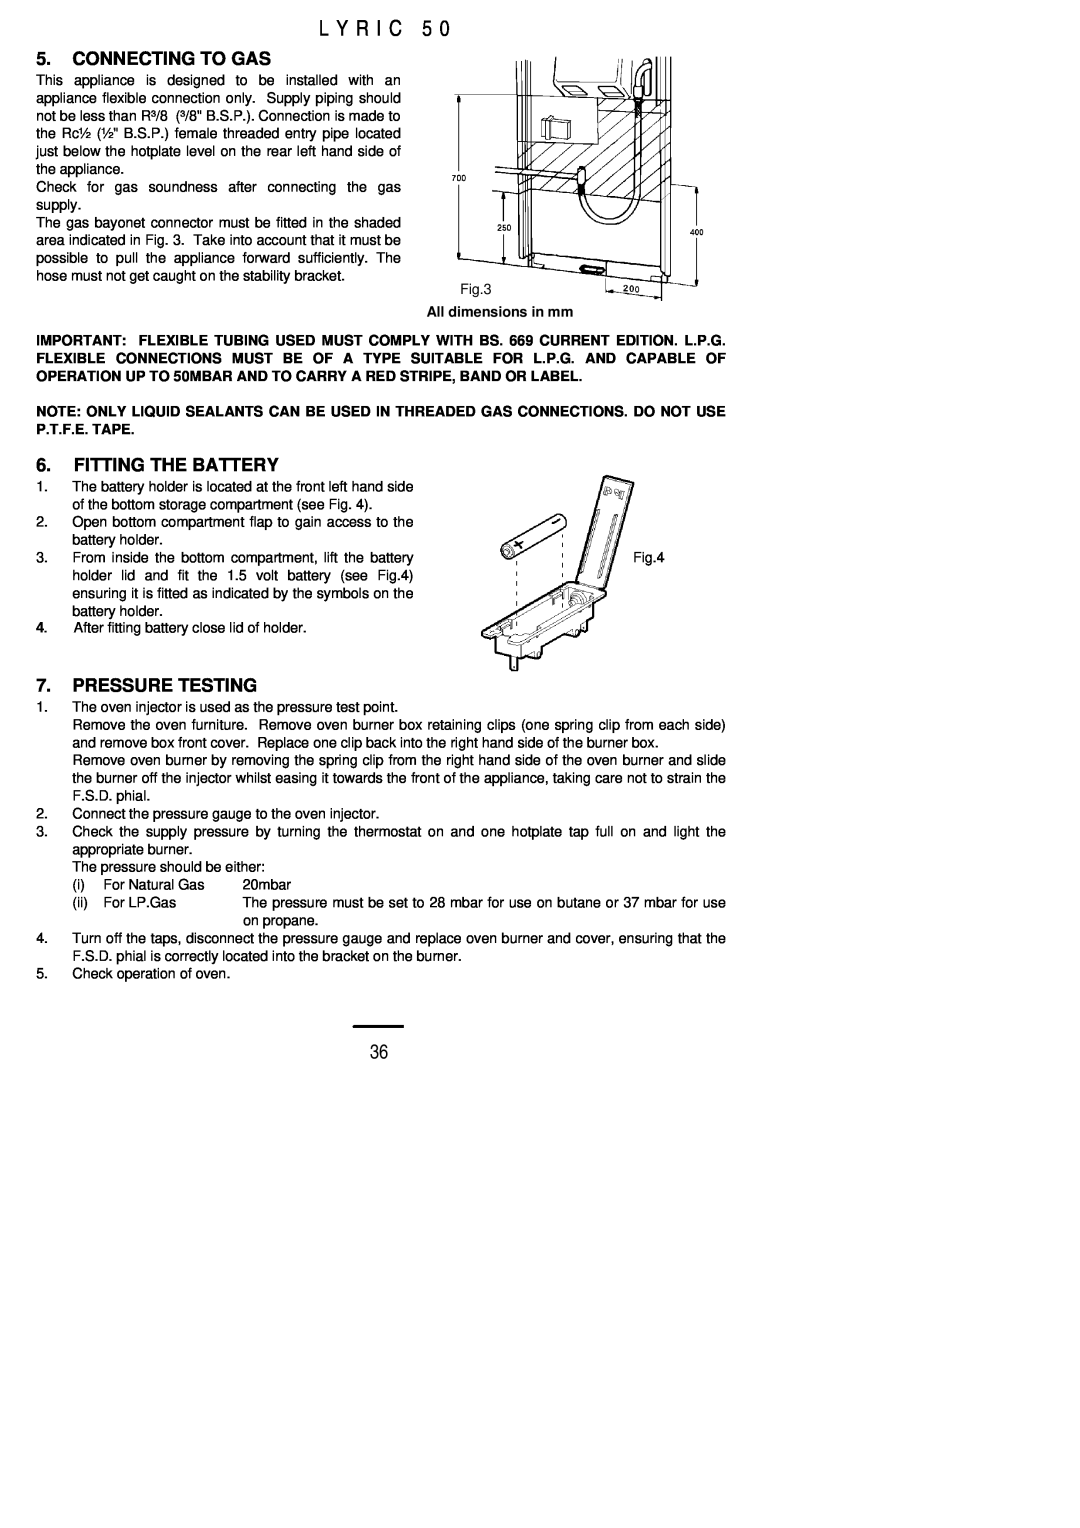 Electrolux Lynic 50 installation instructions L Y R I C, Connecting To Gas, Fitting The Battery, Pressure Testing 